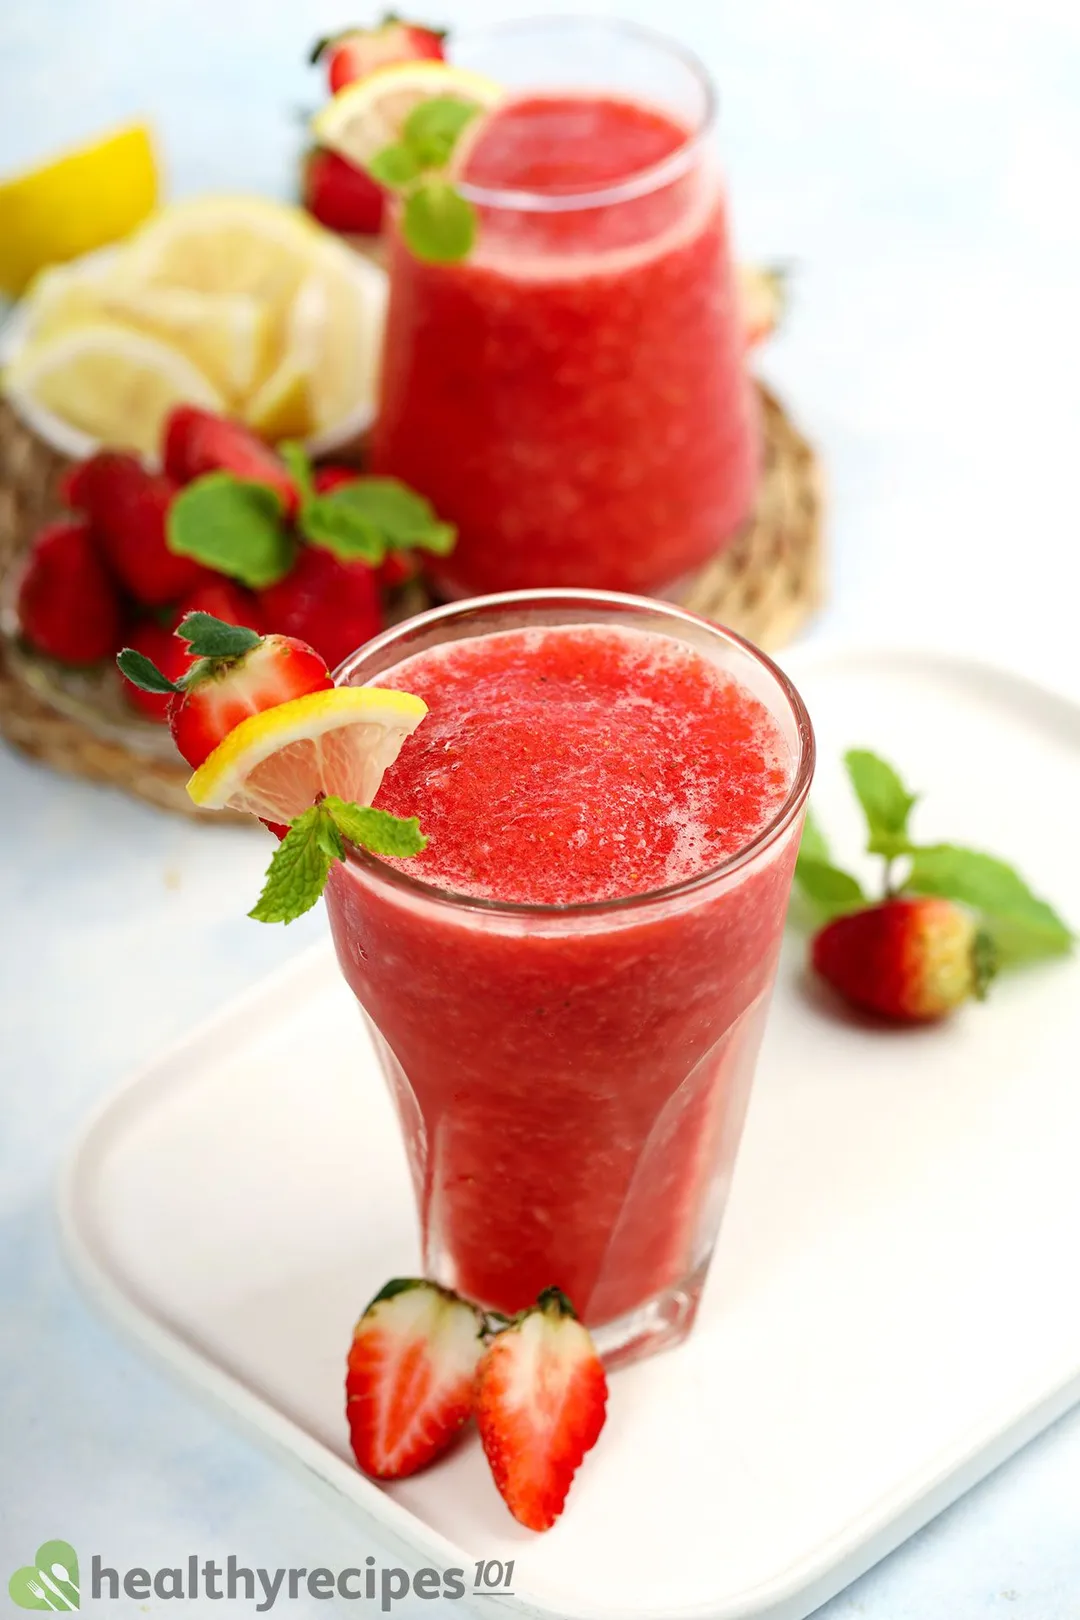 a glass of strawberry lemonade smoothie on a tray